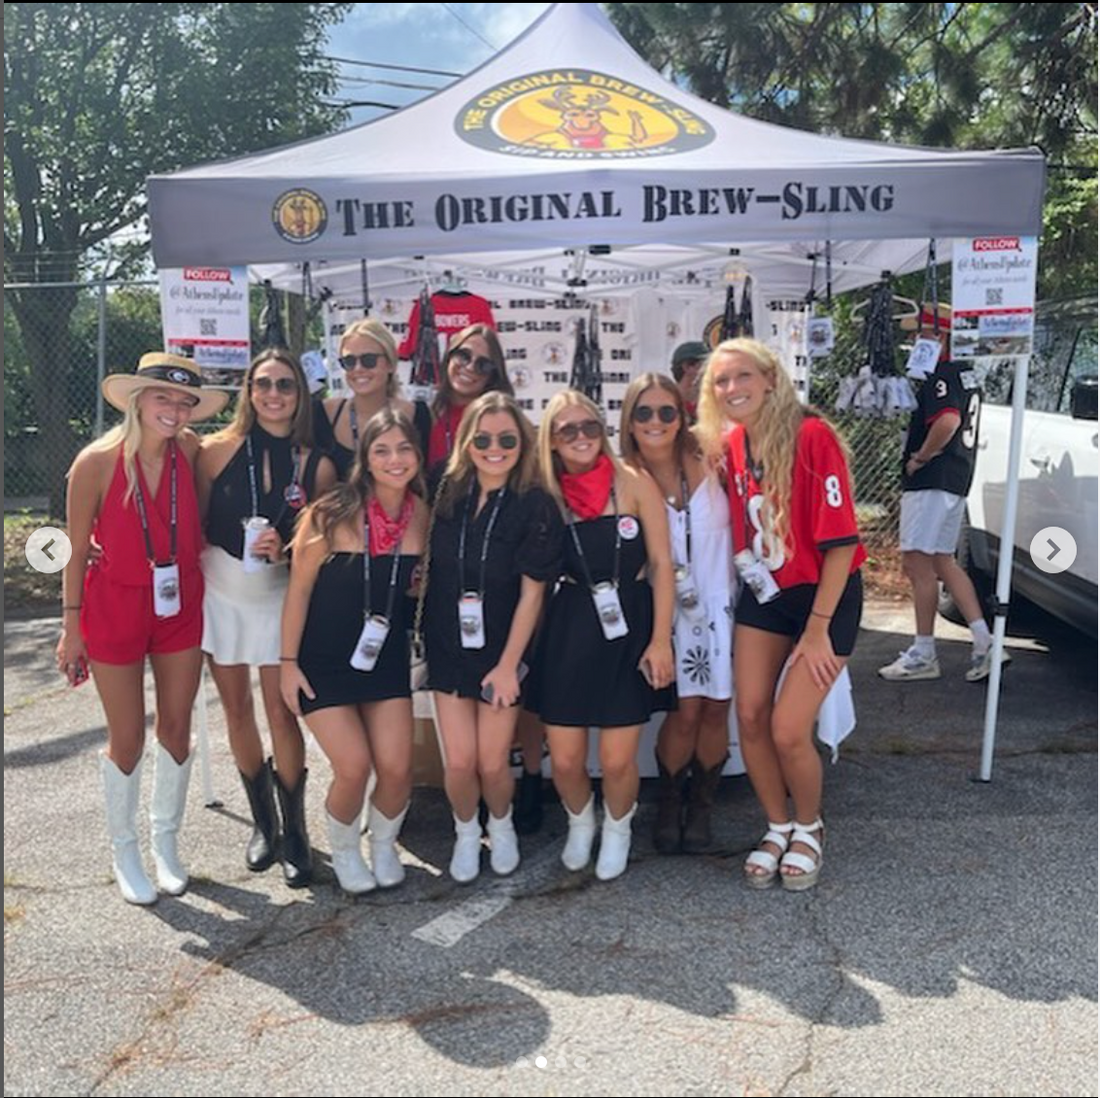 Amp Up Your UGA Football Gamedays and Tailgates with Brewslings